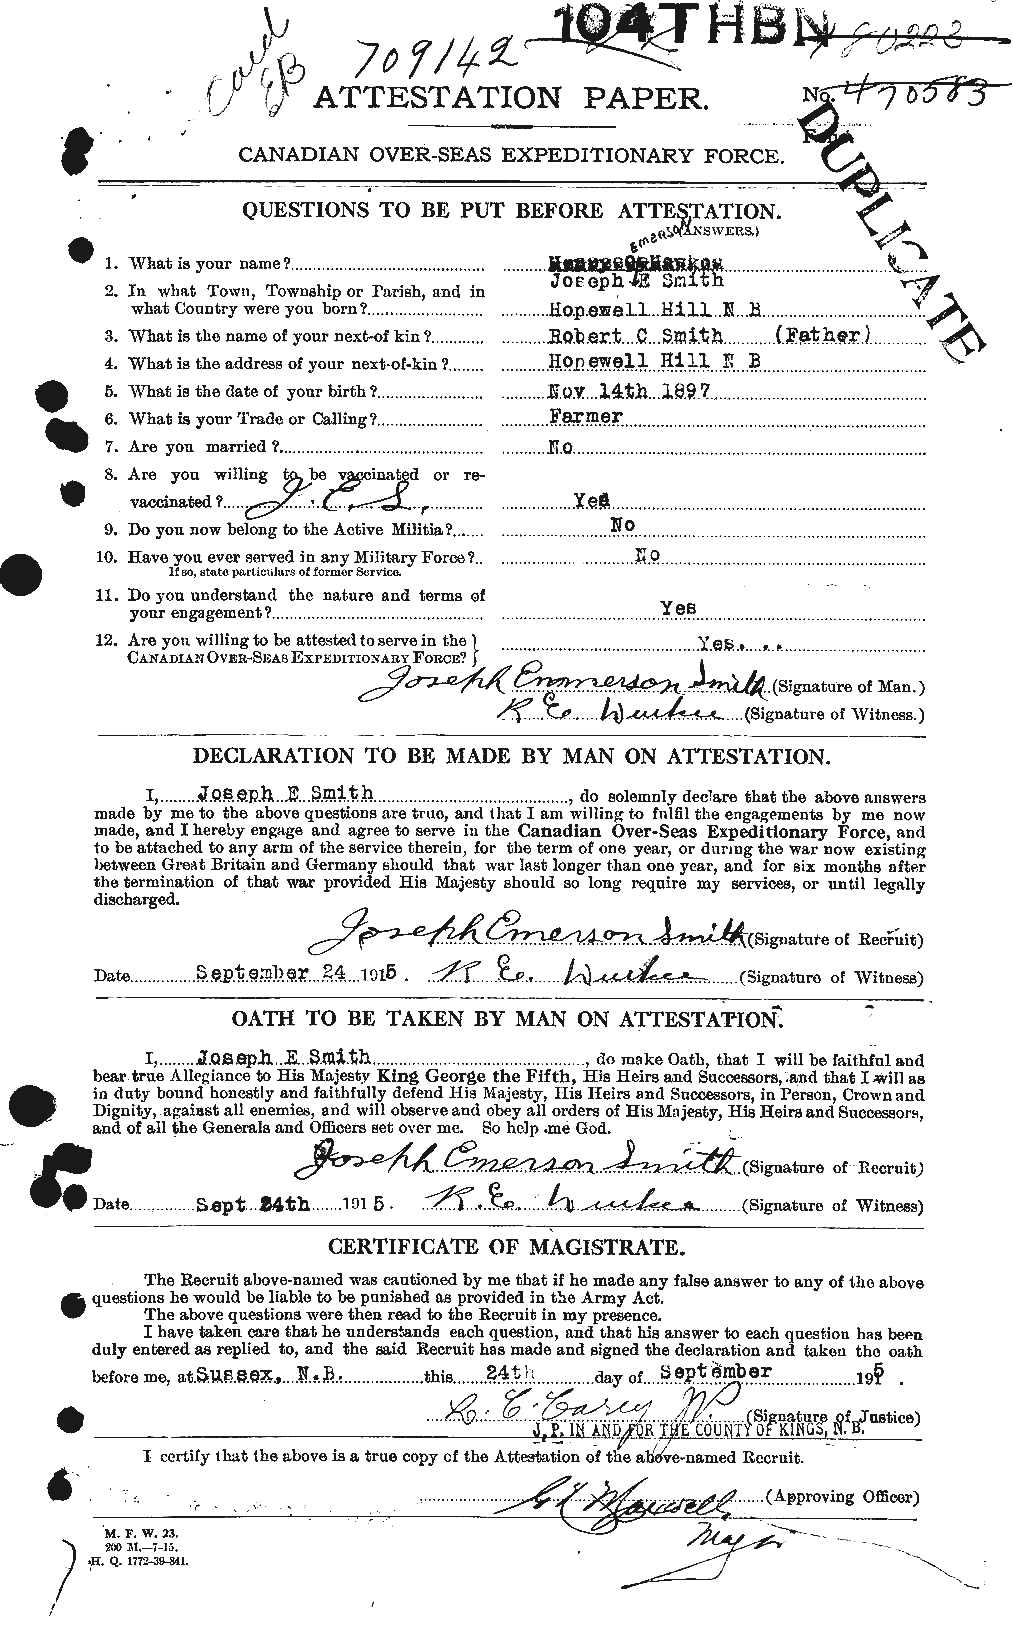 Personnel Records of the First World War - CEF 622081a